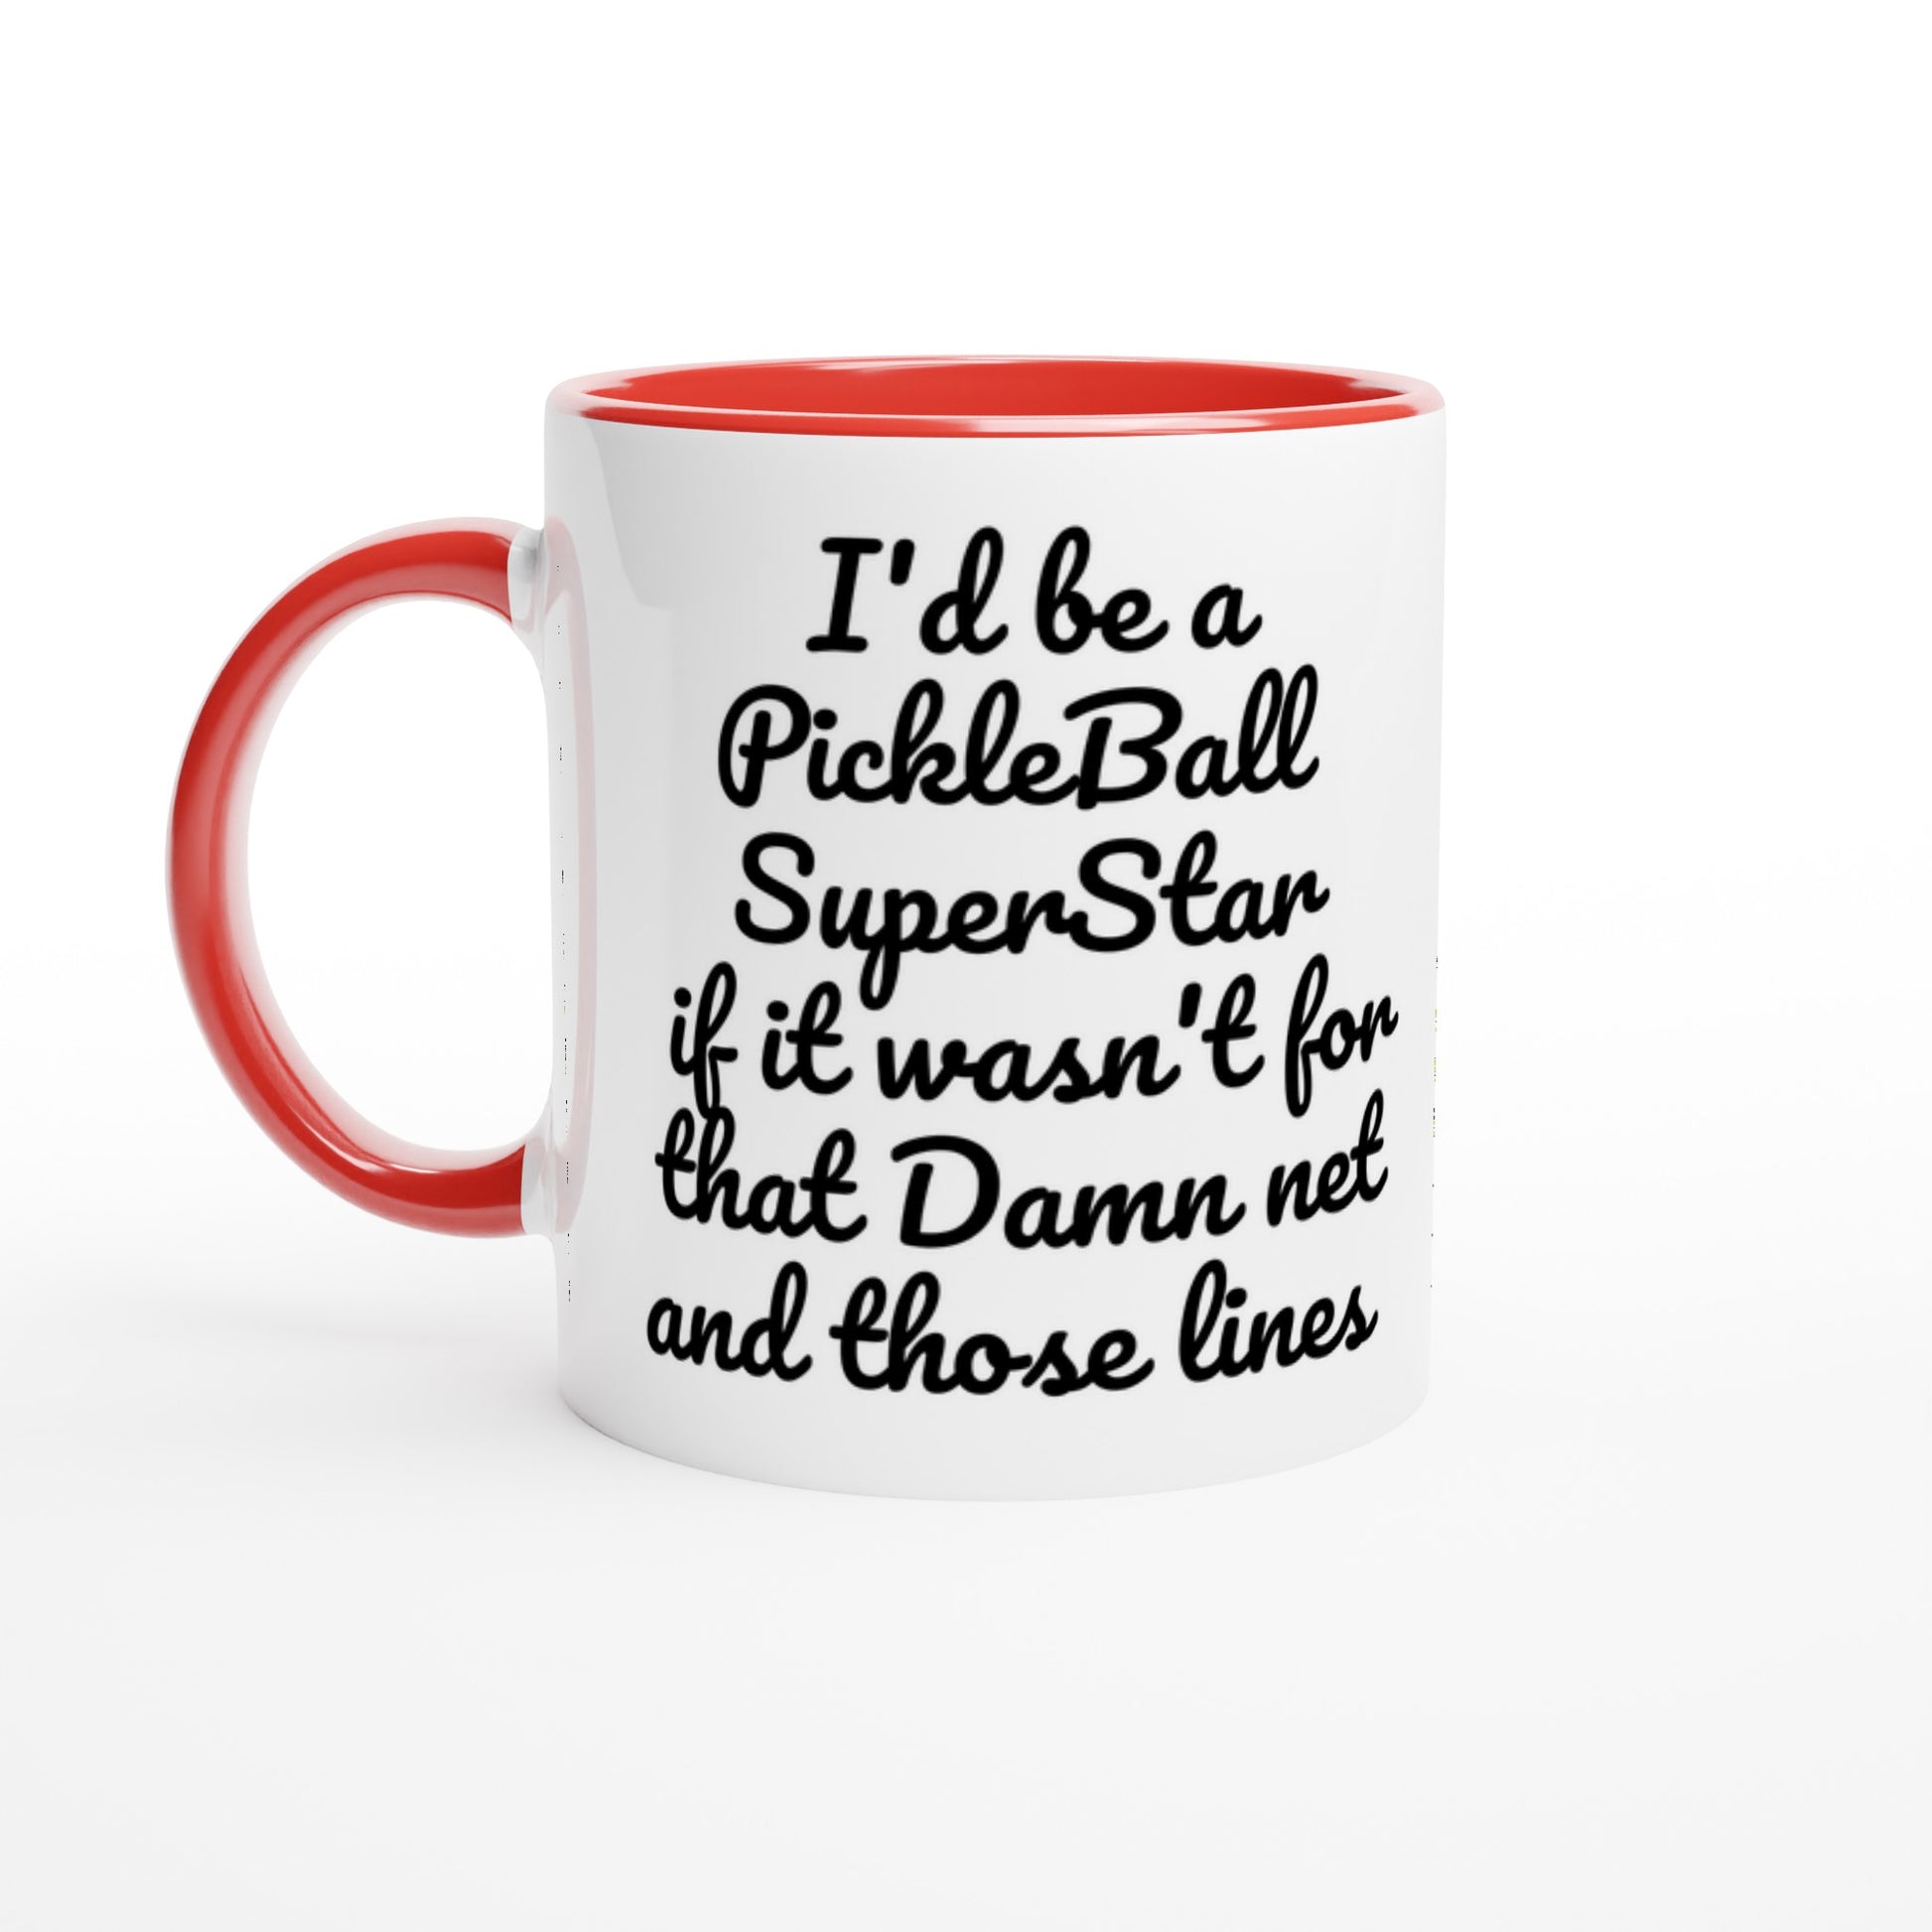 I'd be a PickleBall SuperStar if it wasn't for that Damn net and those lines on front  and Let's Play PickleBall logo on back Pickleball 11oz white ceramic mug with red handle, rim and inside coffee mug it's dishwasher safe and microwave safe.